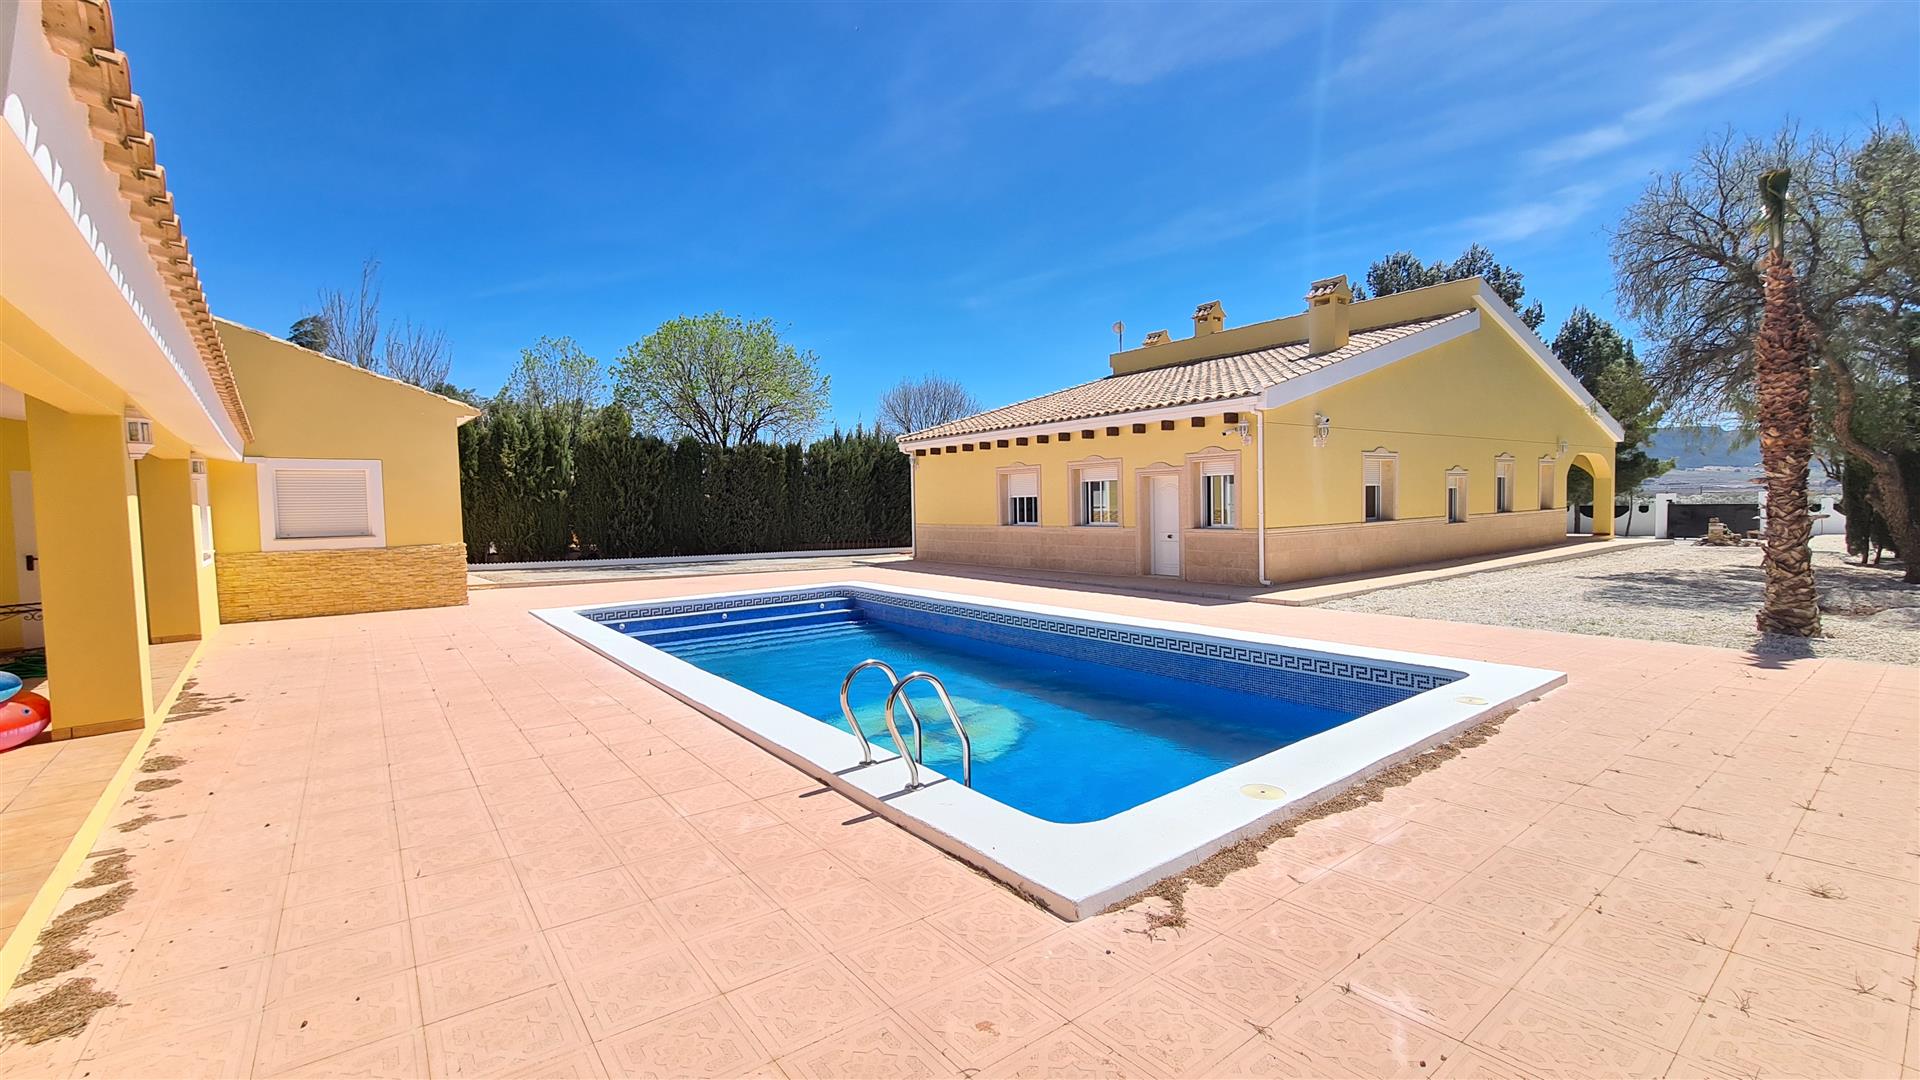 7 - 8 bedroom 4 bathroom renovated villa with guest house, pool, certificate of habitation